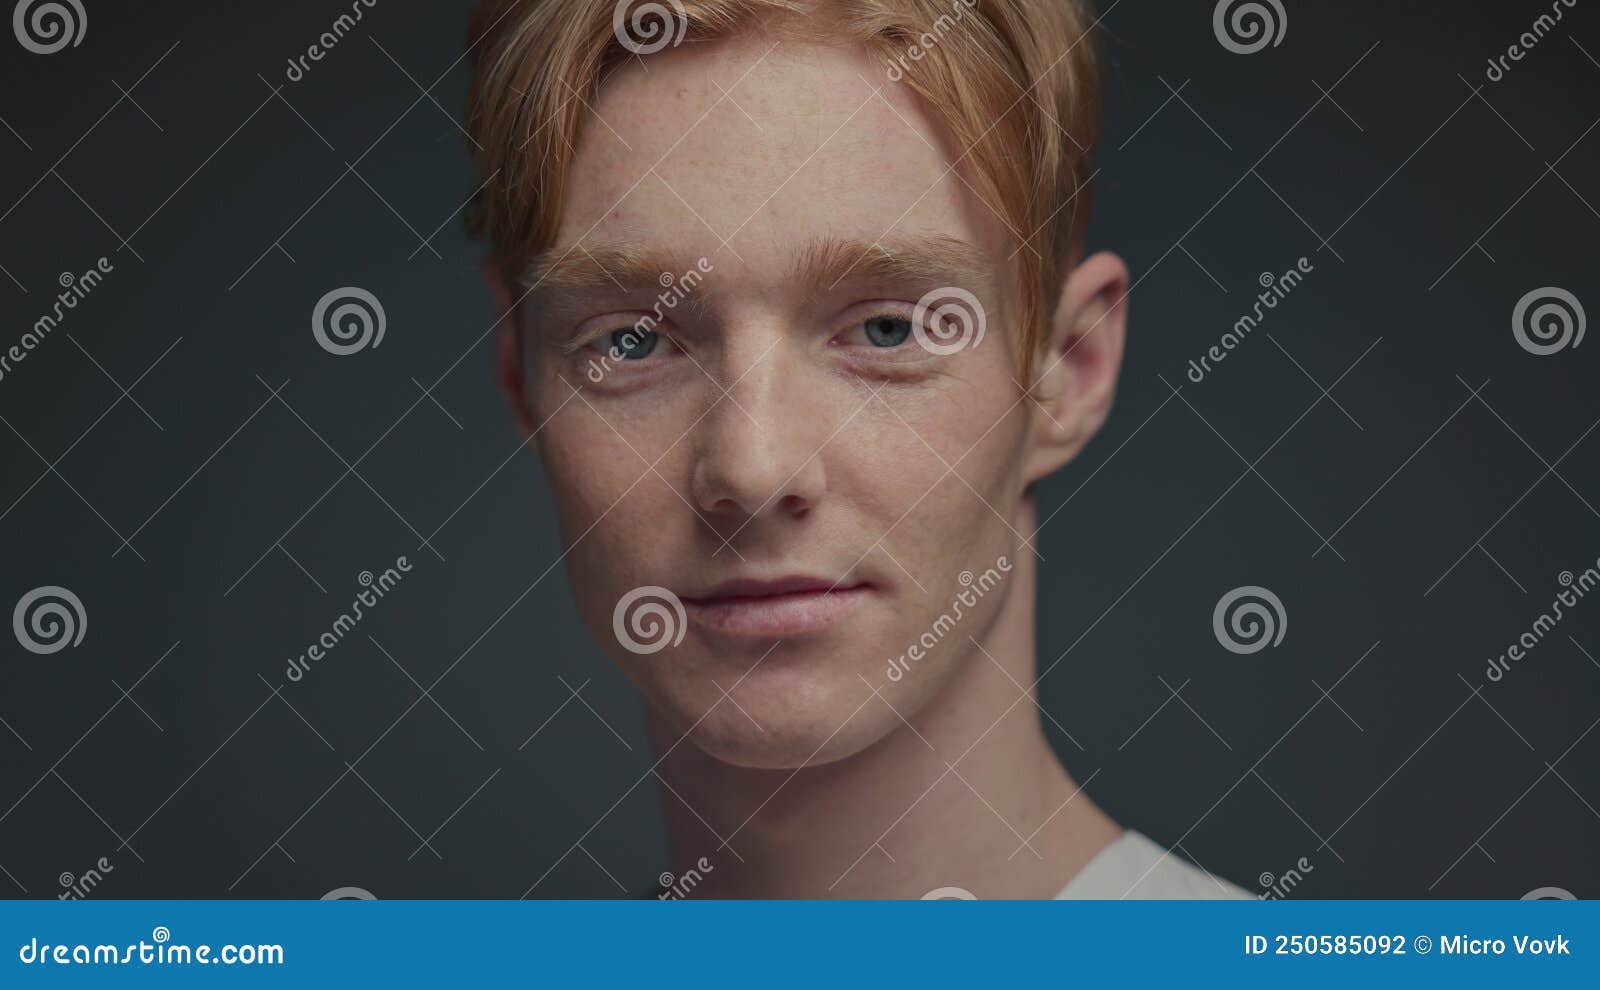 10. Red and Blonde Hair Guy with Freckles - wide 3